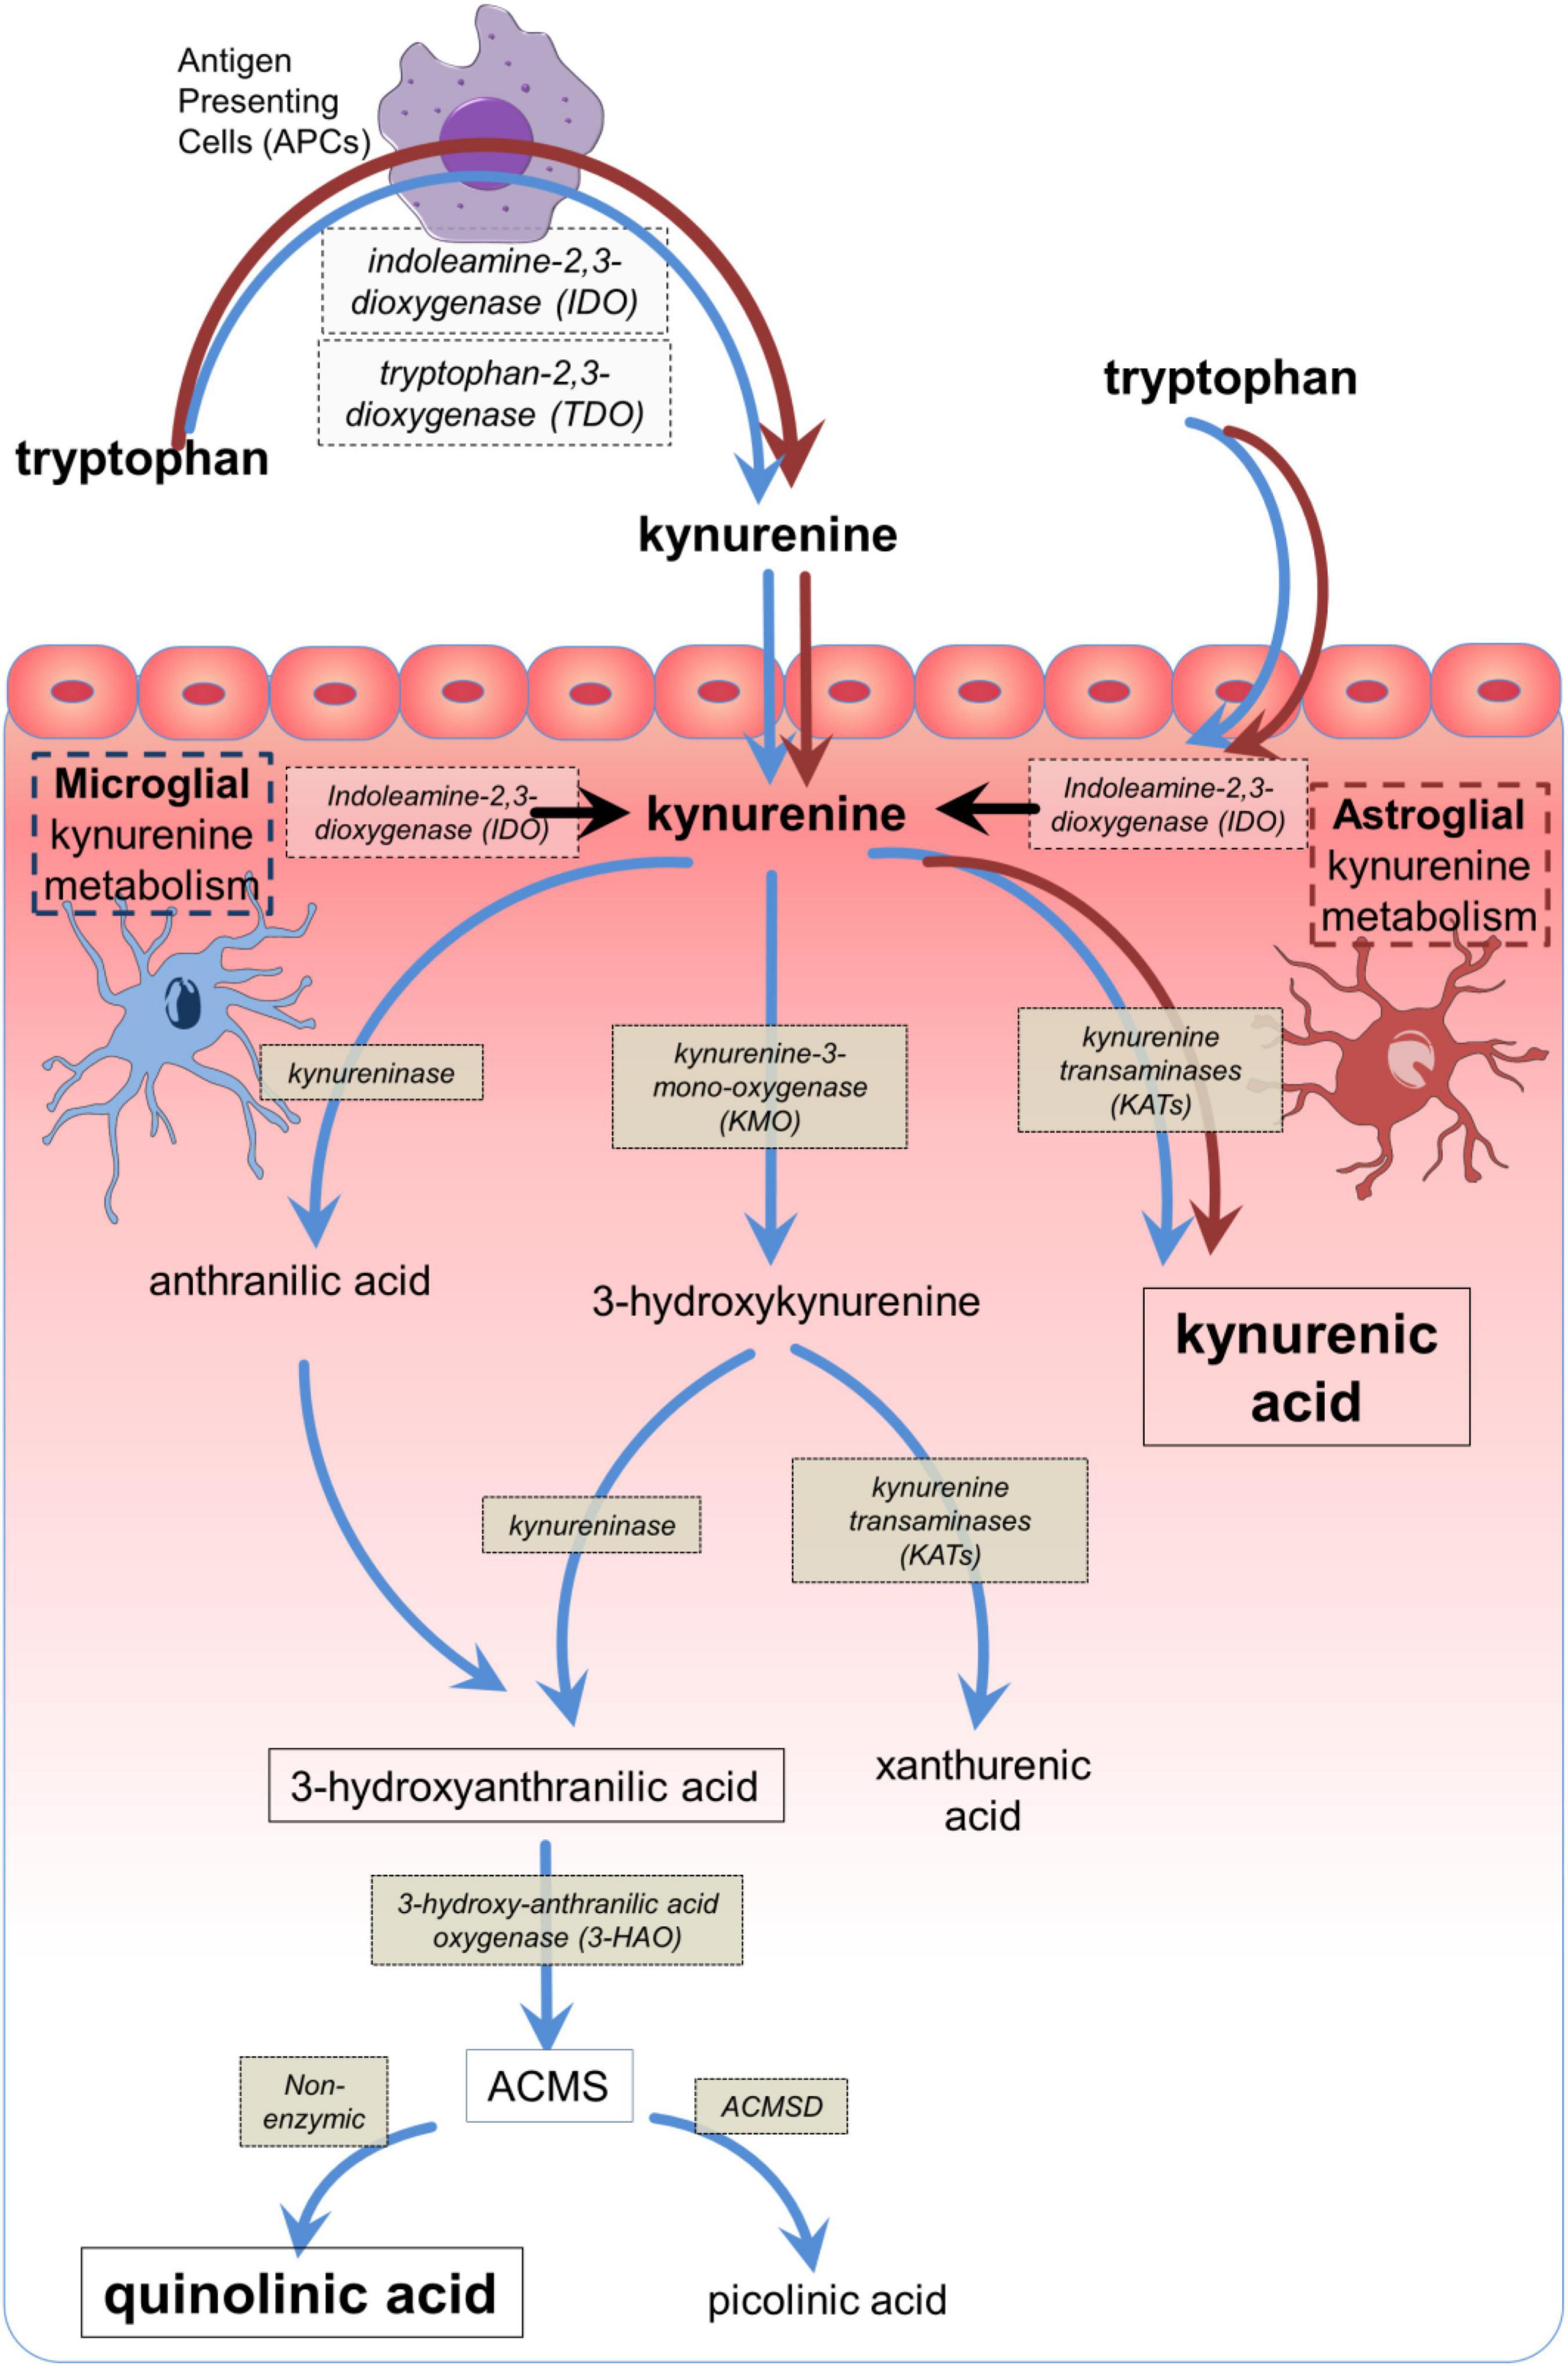 Frontiers | An integrated cytokine and kynurenine network as the